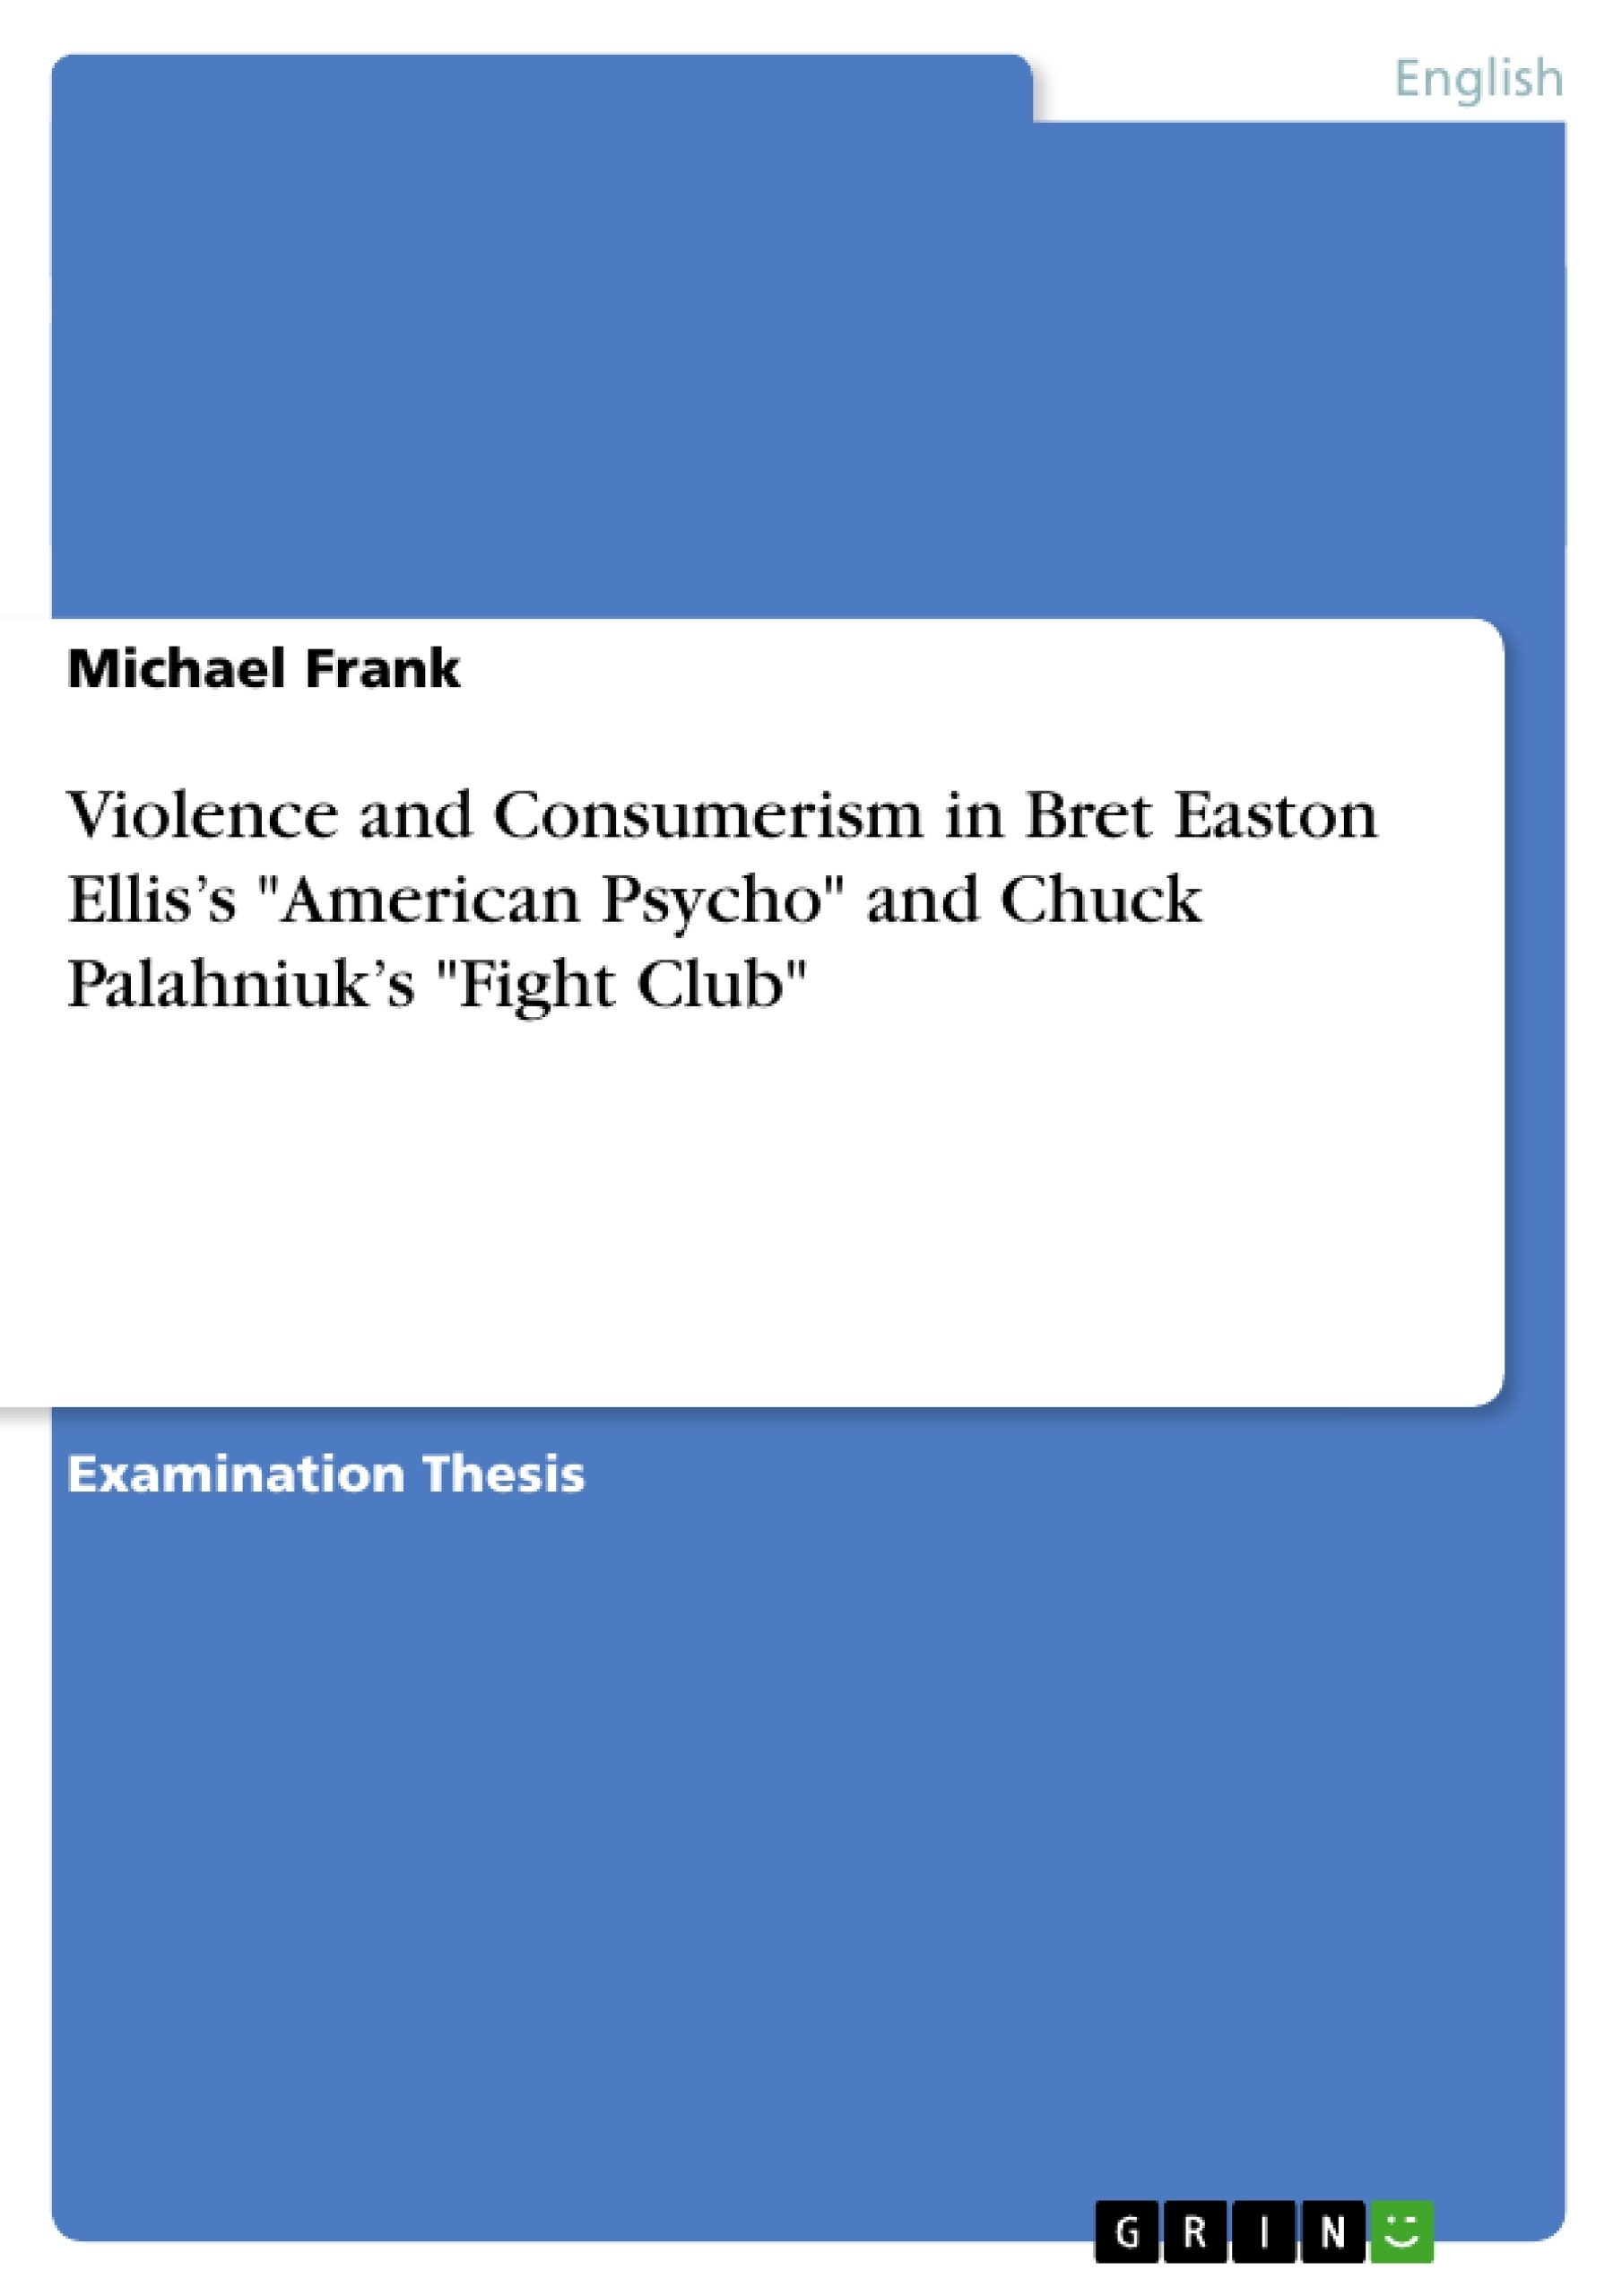 Title: Violence and Consumerism in Bret Easton Ellis’s "American Psycho" and Chuck Palahniuk’s "Fight Club"